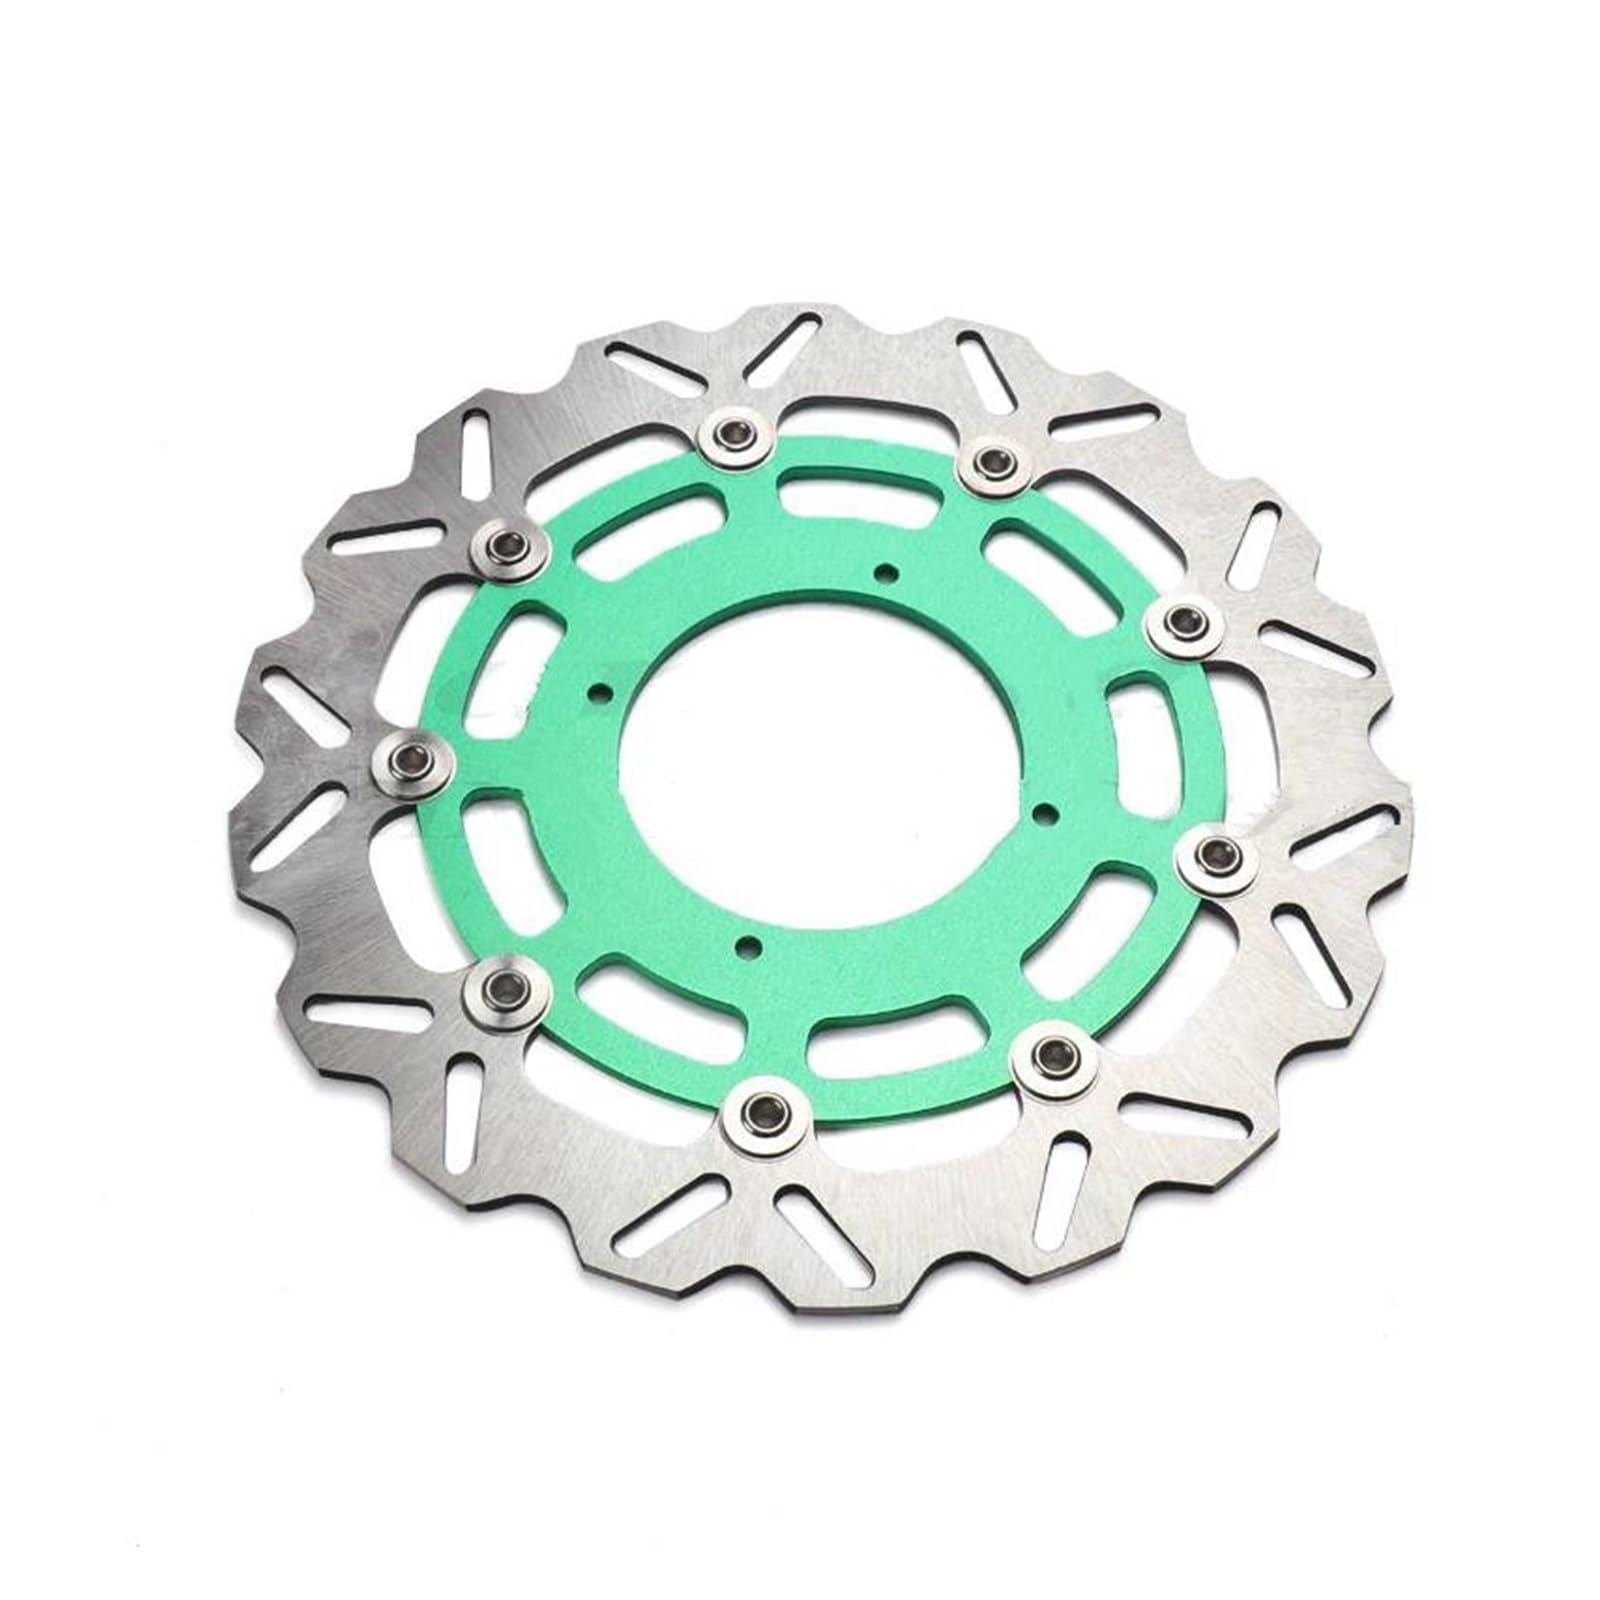 Bremsscheibe 320MM Oversize Front Floating Brake Disc Rotor Plate For Kawasaki Dirt Pit Bike Racing Motorcycle Supermoto Motorrad-Bremsscheibe von REPELKY